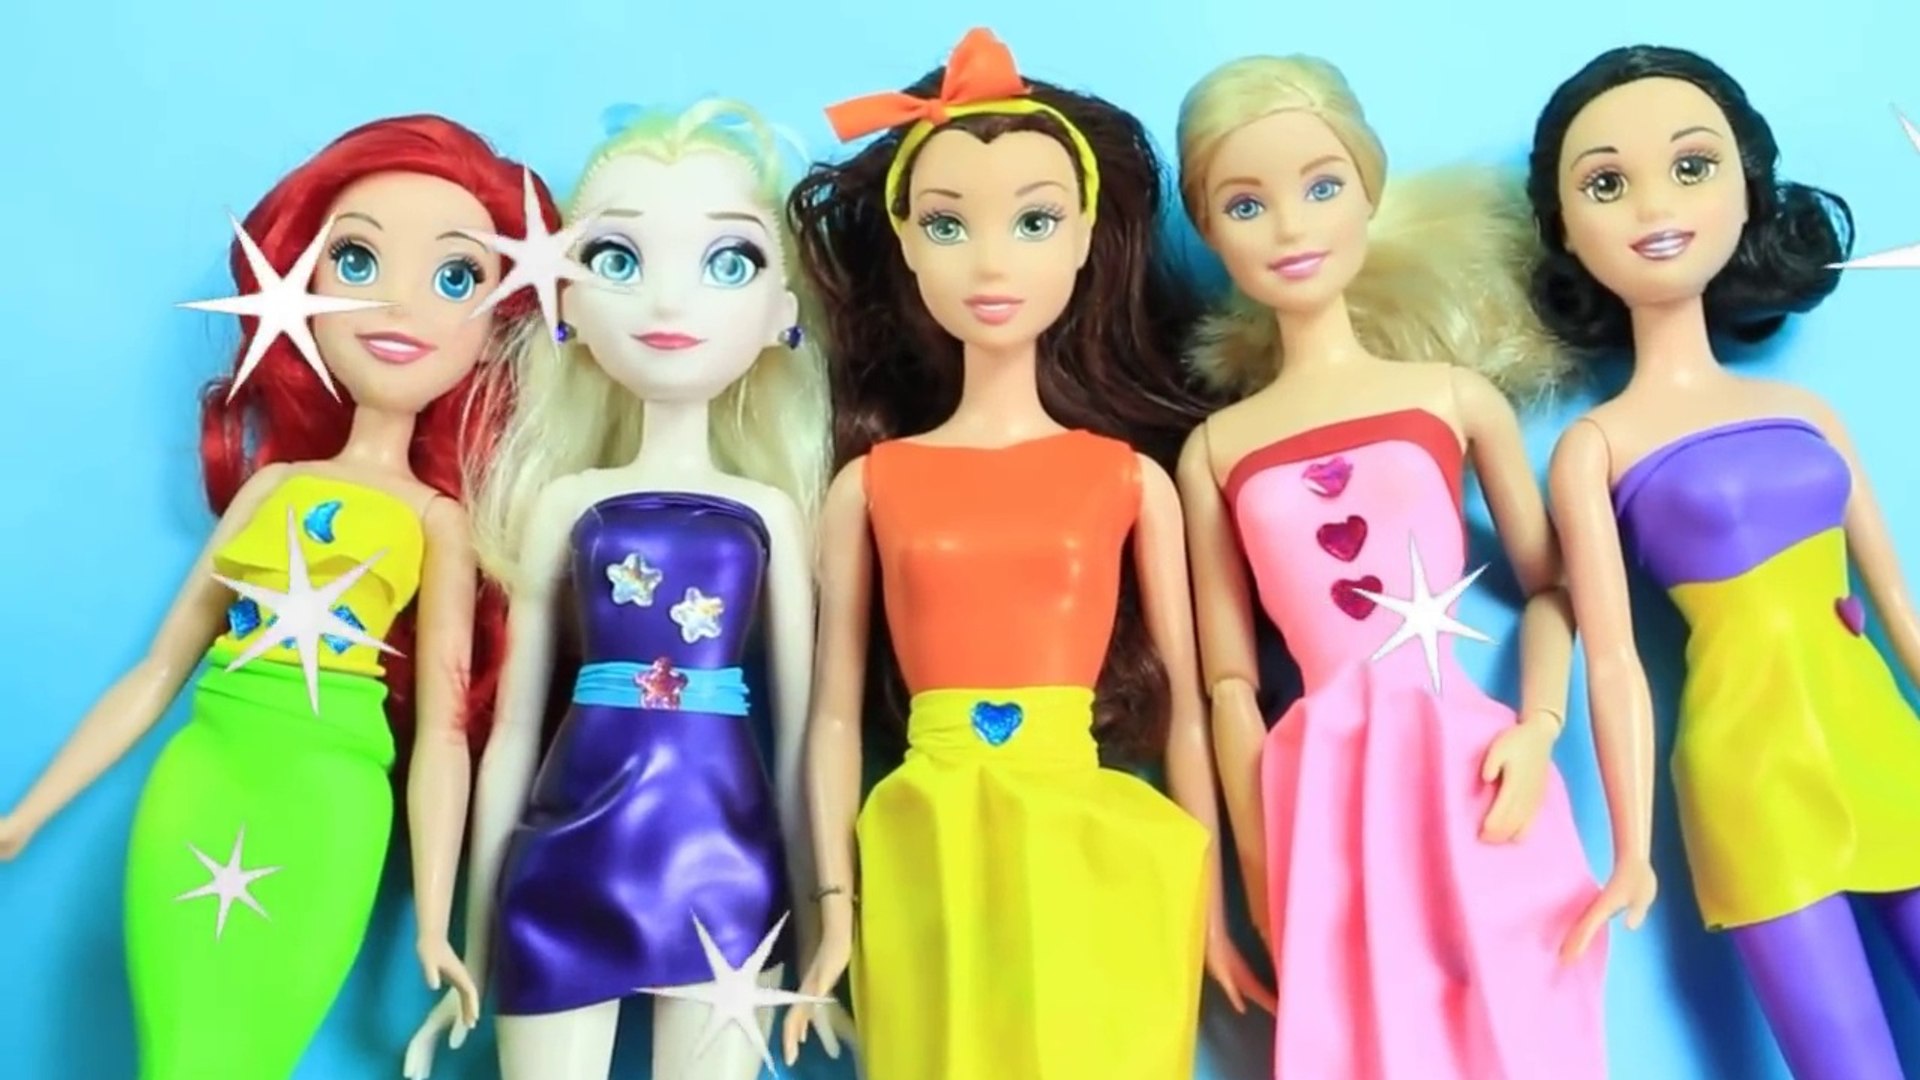 DIY Barbie Crafts and Ideas, Making Easy Hacks For Barbie Doll